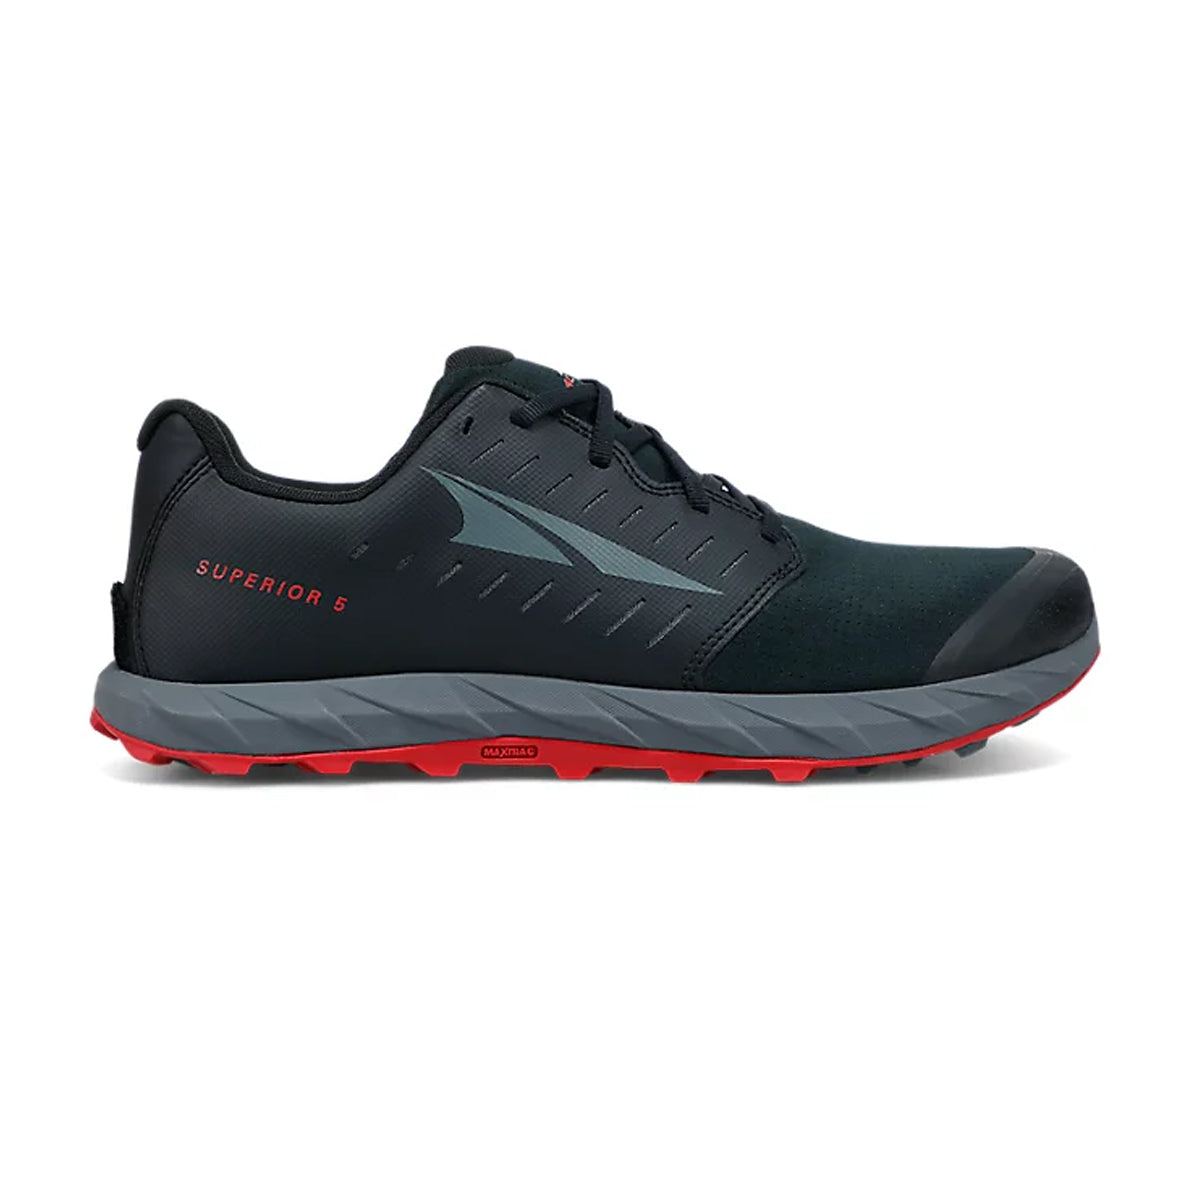 Altra Superior 5 in Black & Red by GOHUNT | Altra - GOHUNT Shop